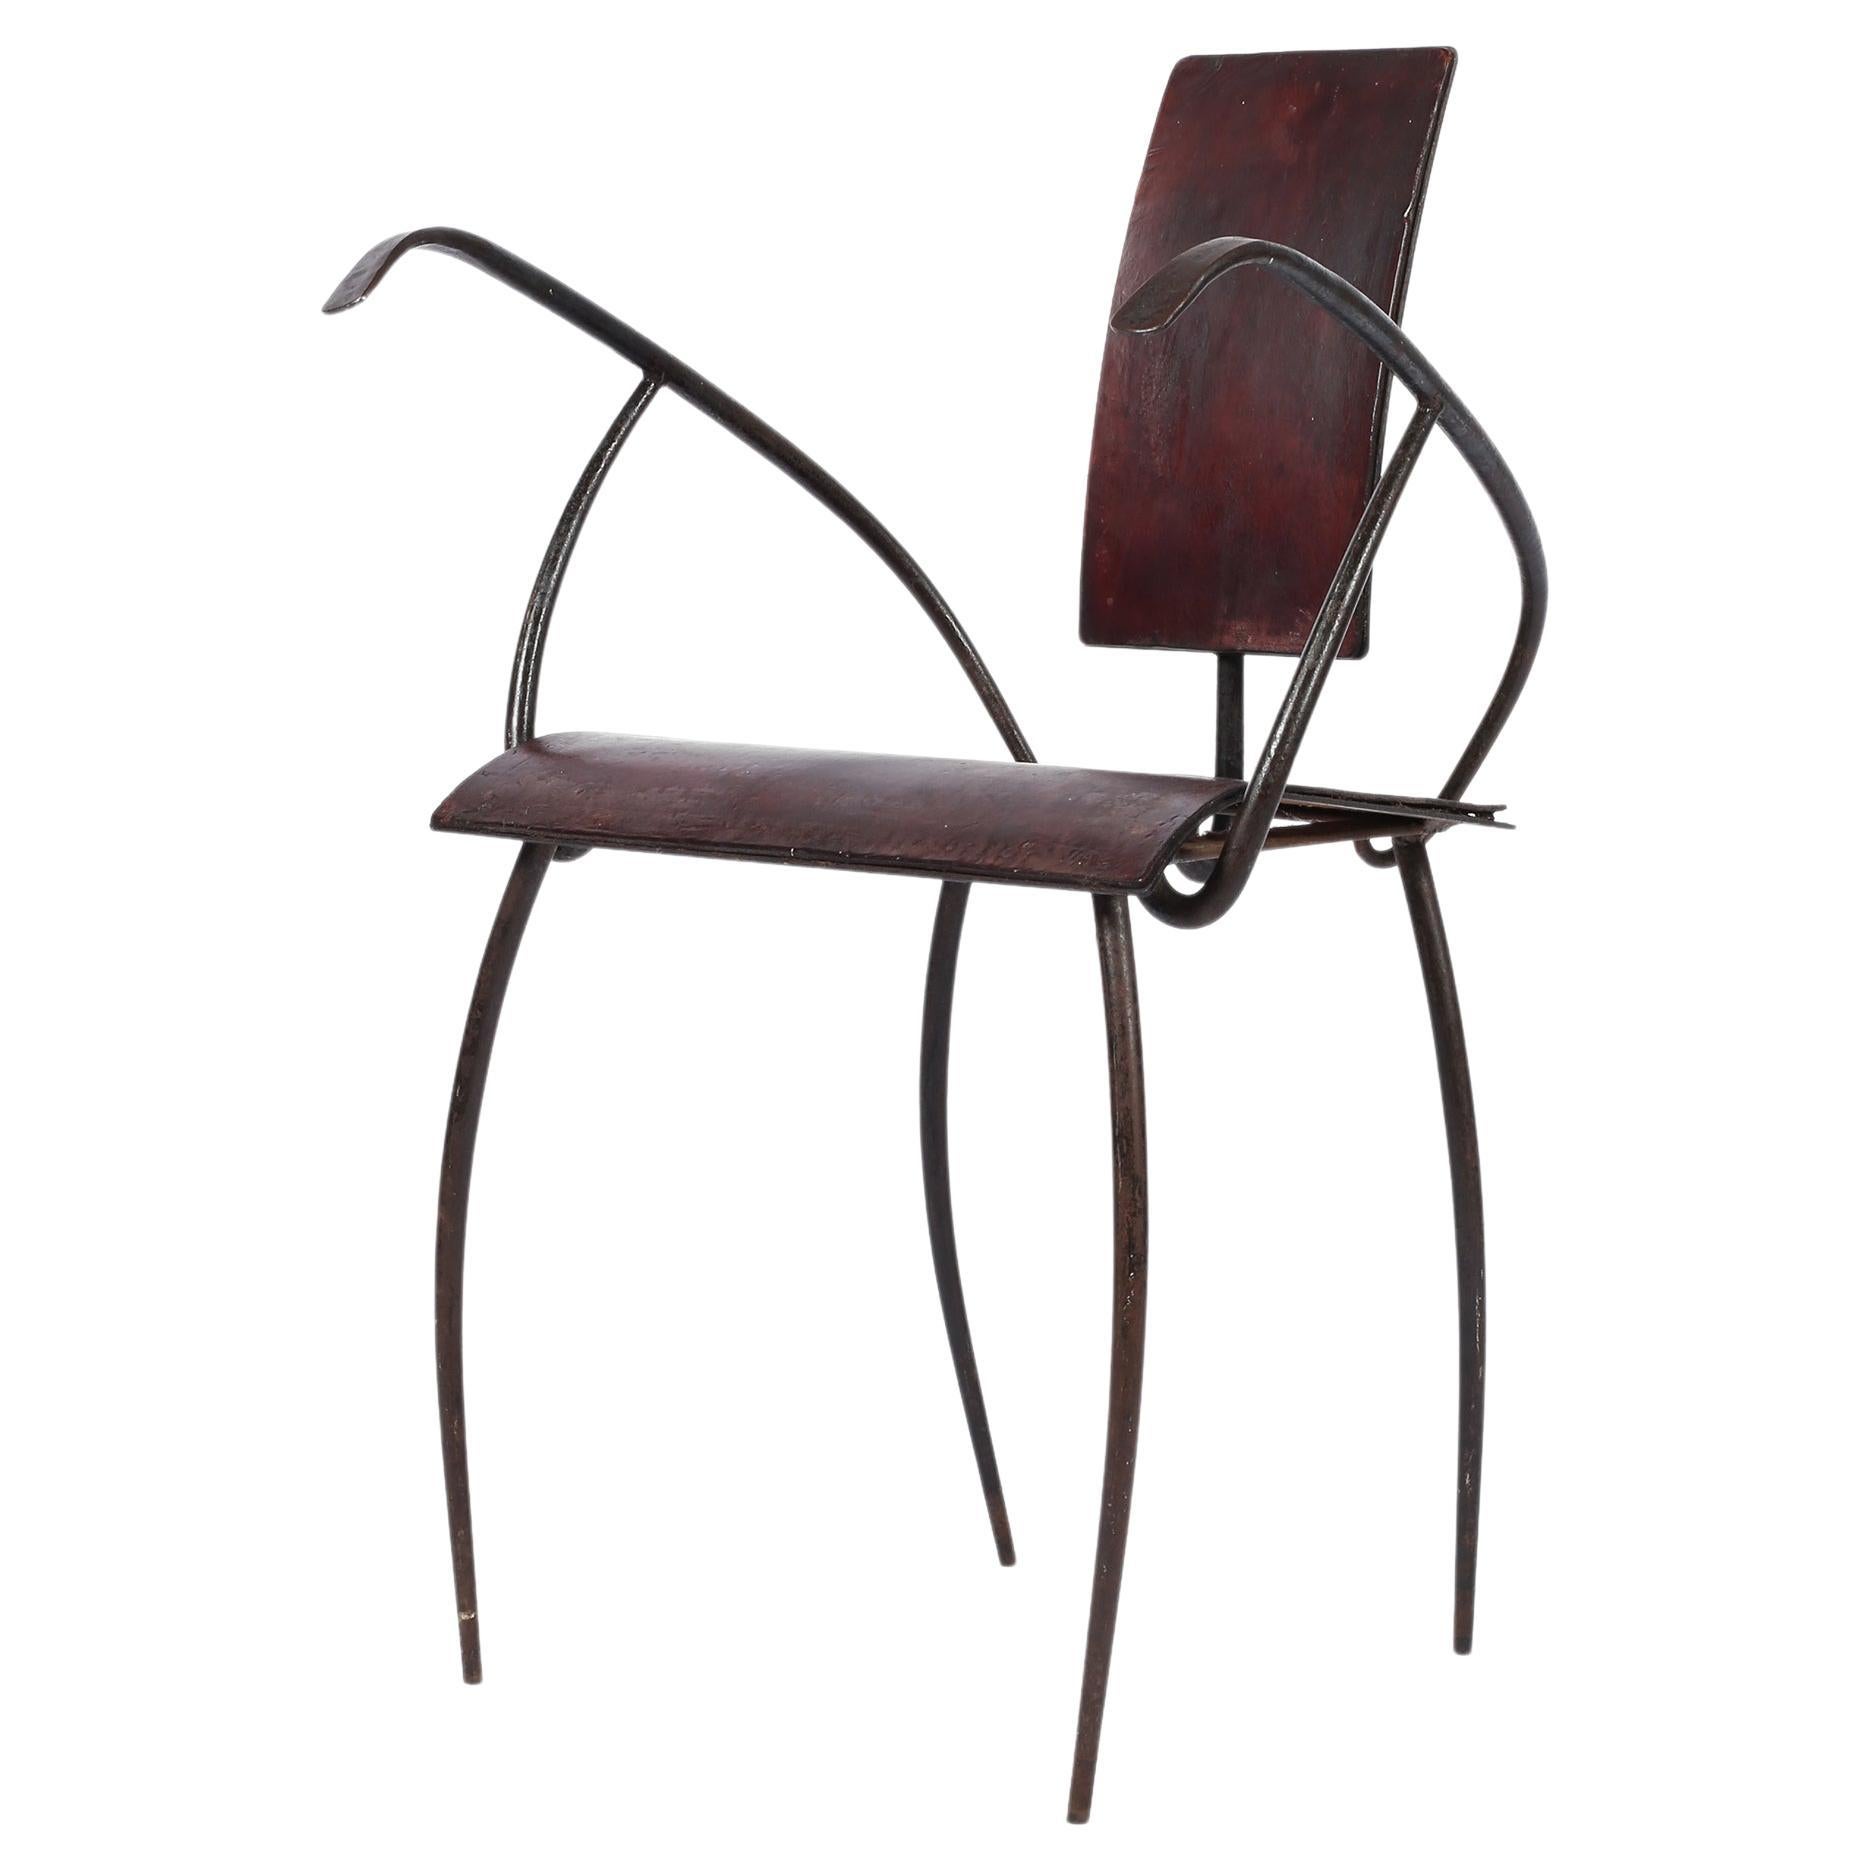 Artisanal French Modernist Iron and Leather Chair Midcentury Modern For Sale